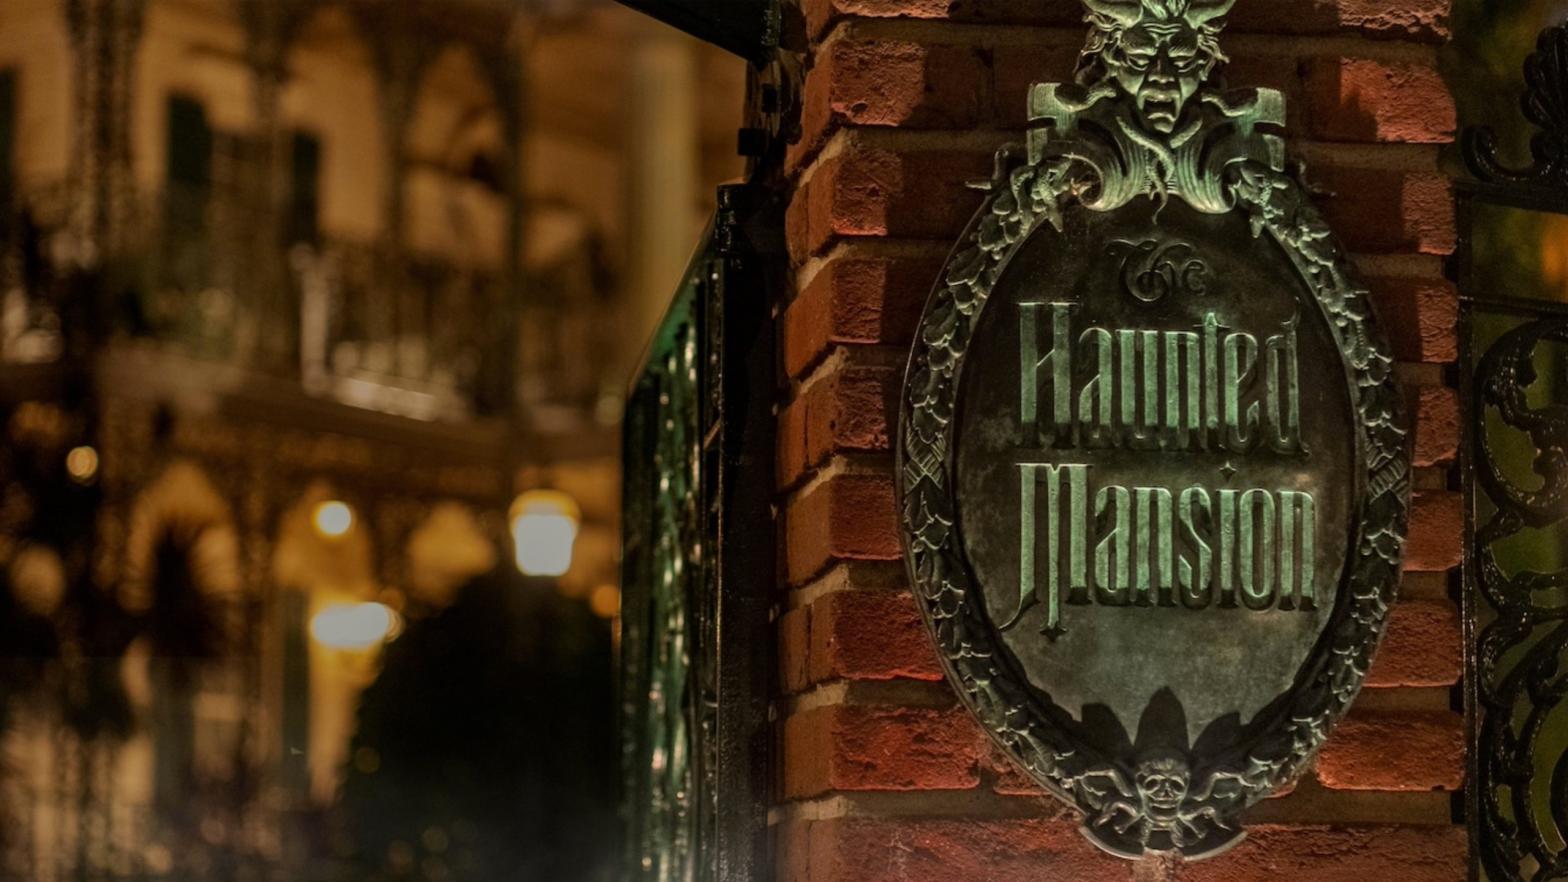 Get on the Doom Buggy, a Haunted Mansion movie is moving forward. (Photo: Disney Parks)